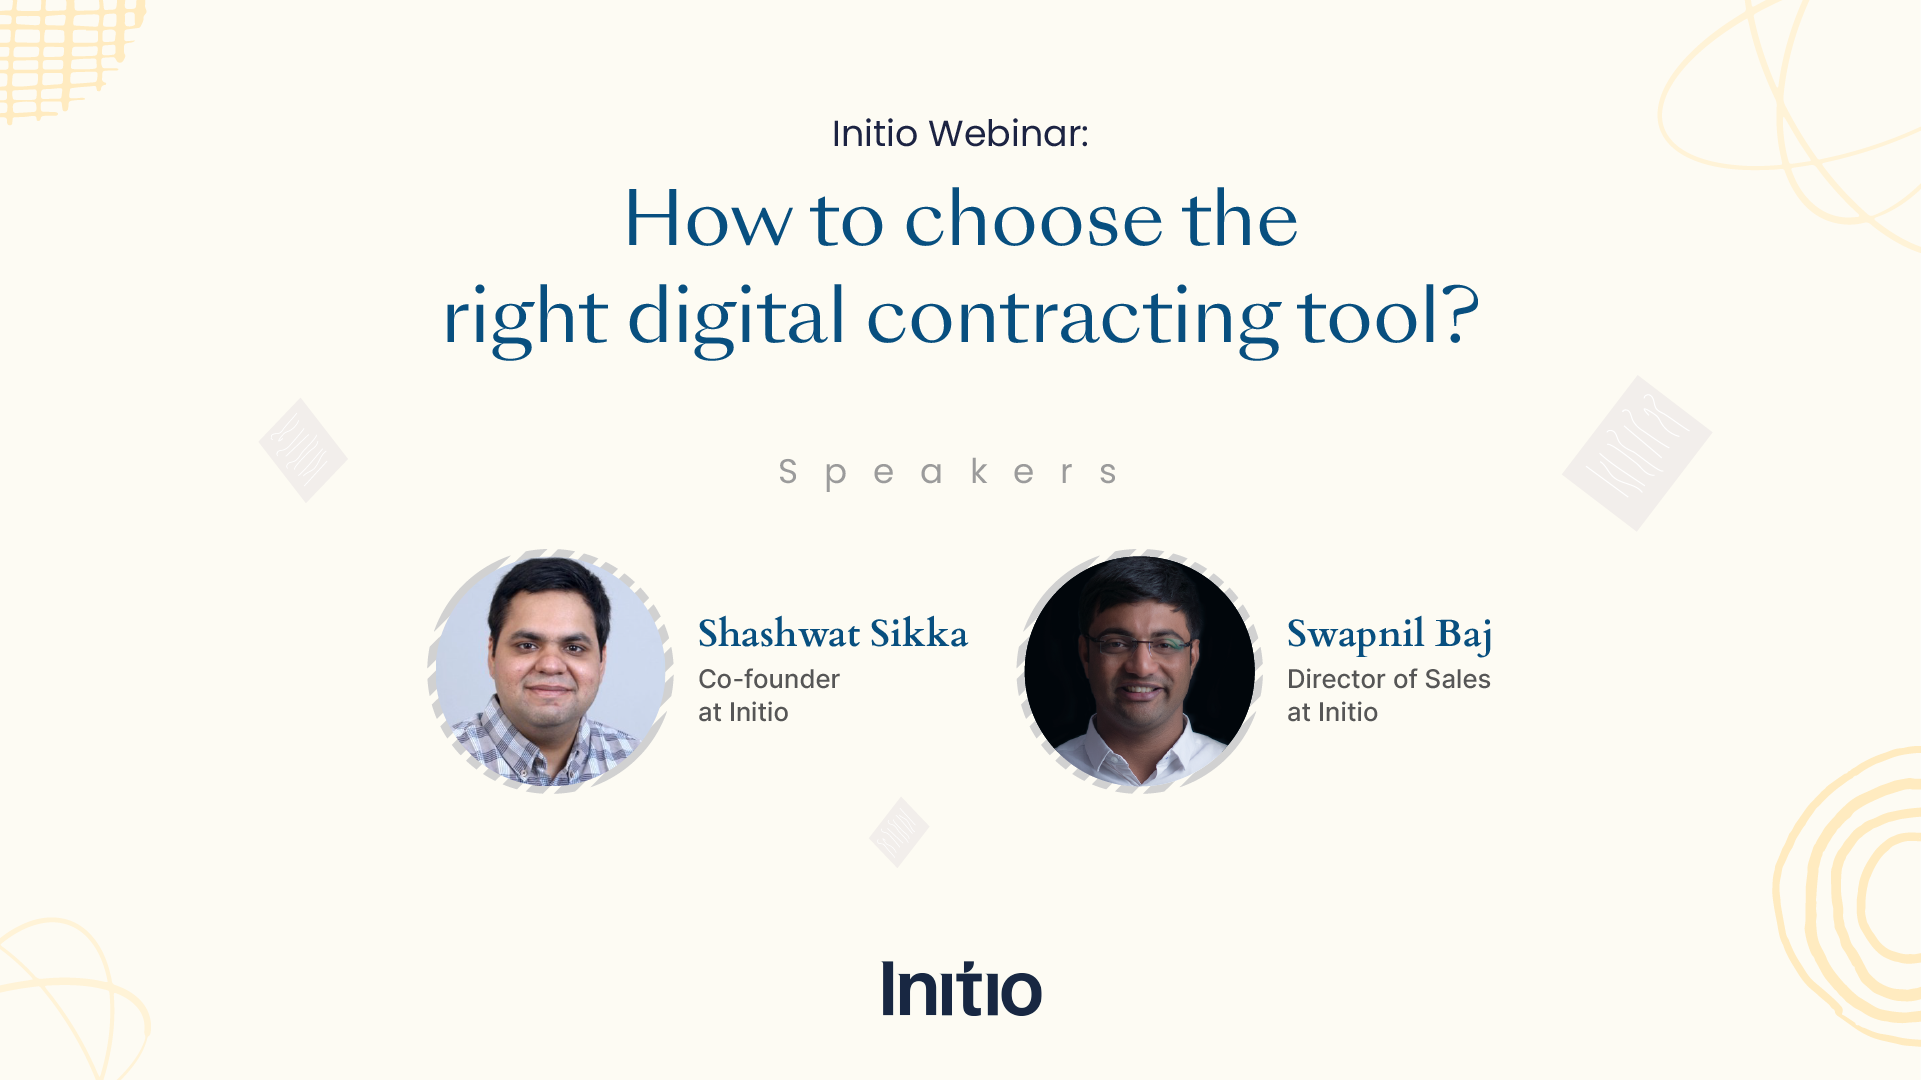 How to choose the right digital contracting tool?